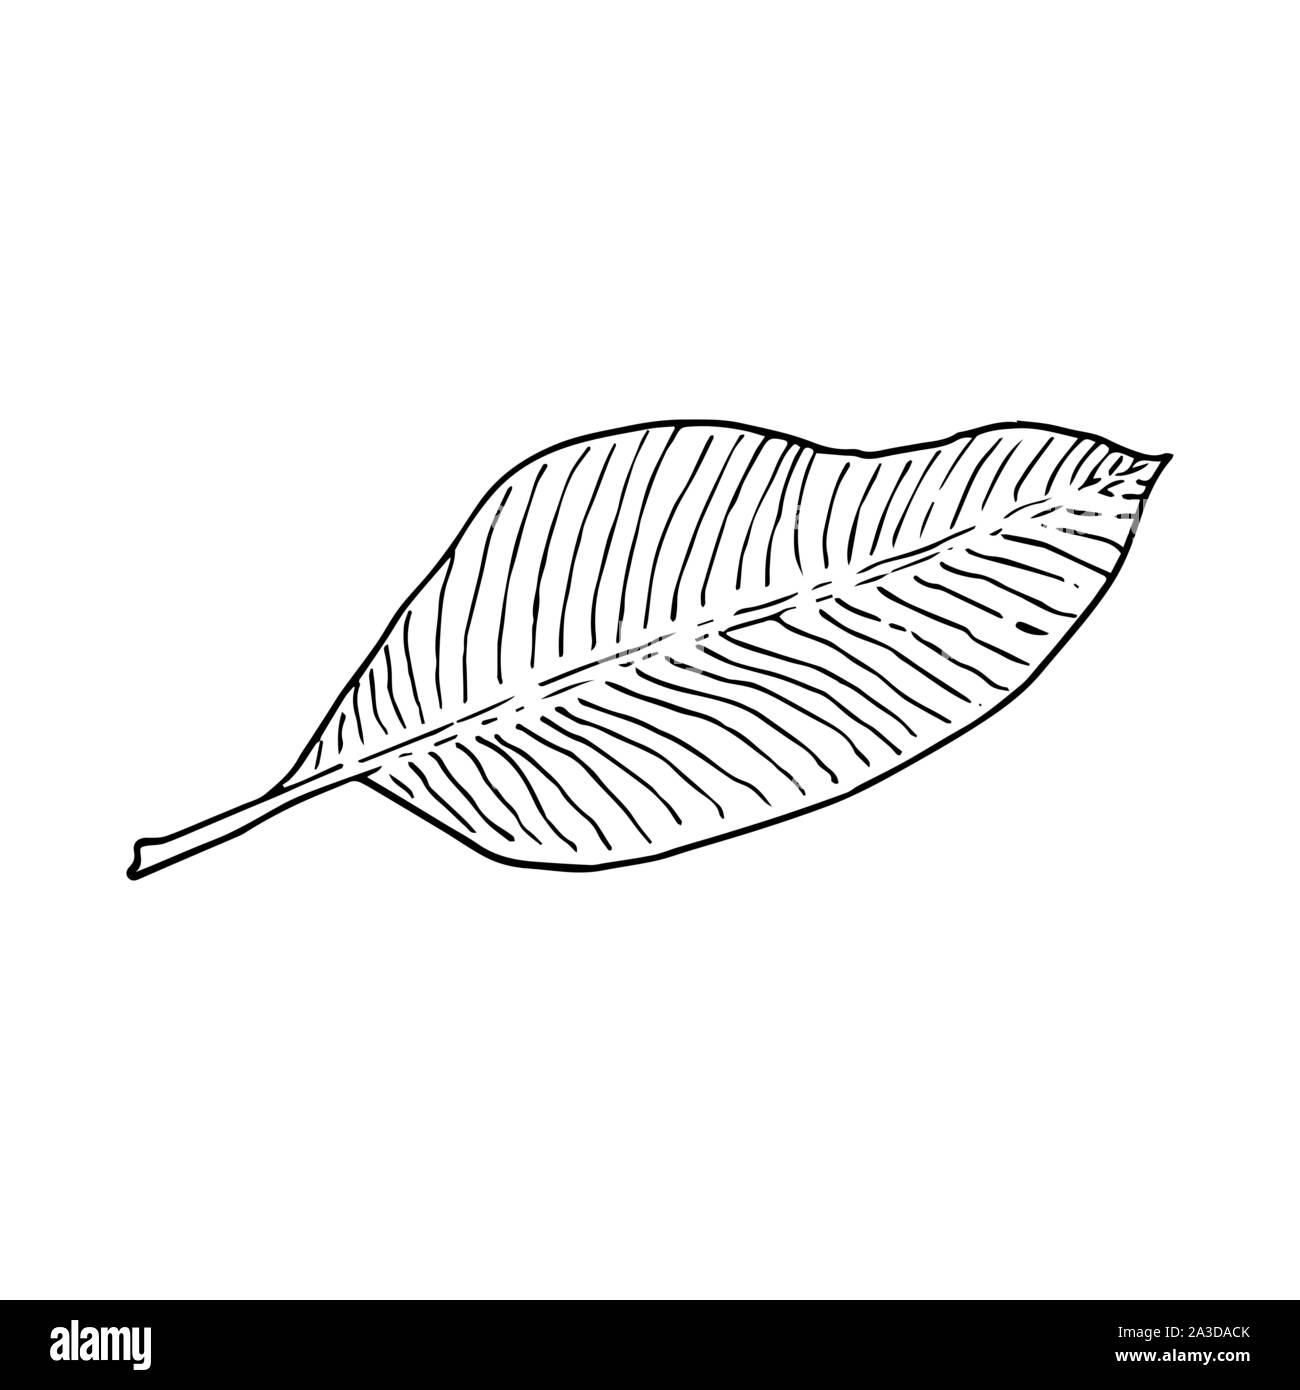 Banana tree leaf. Line art doodle sketch. Black outline on white background. Picture can be used in greeting cards, posters, flyers, banners, logo, botanical design etc. Vector illustration. EPS10 Stock Vector